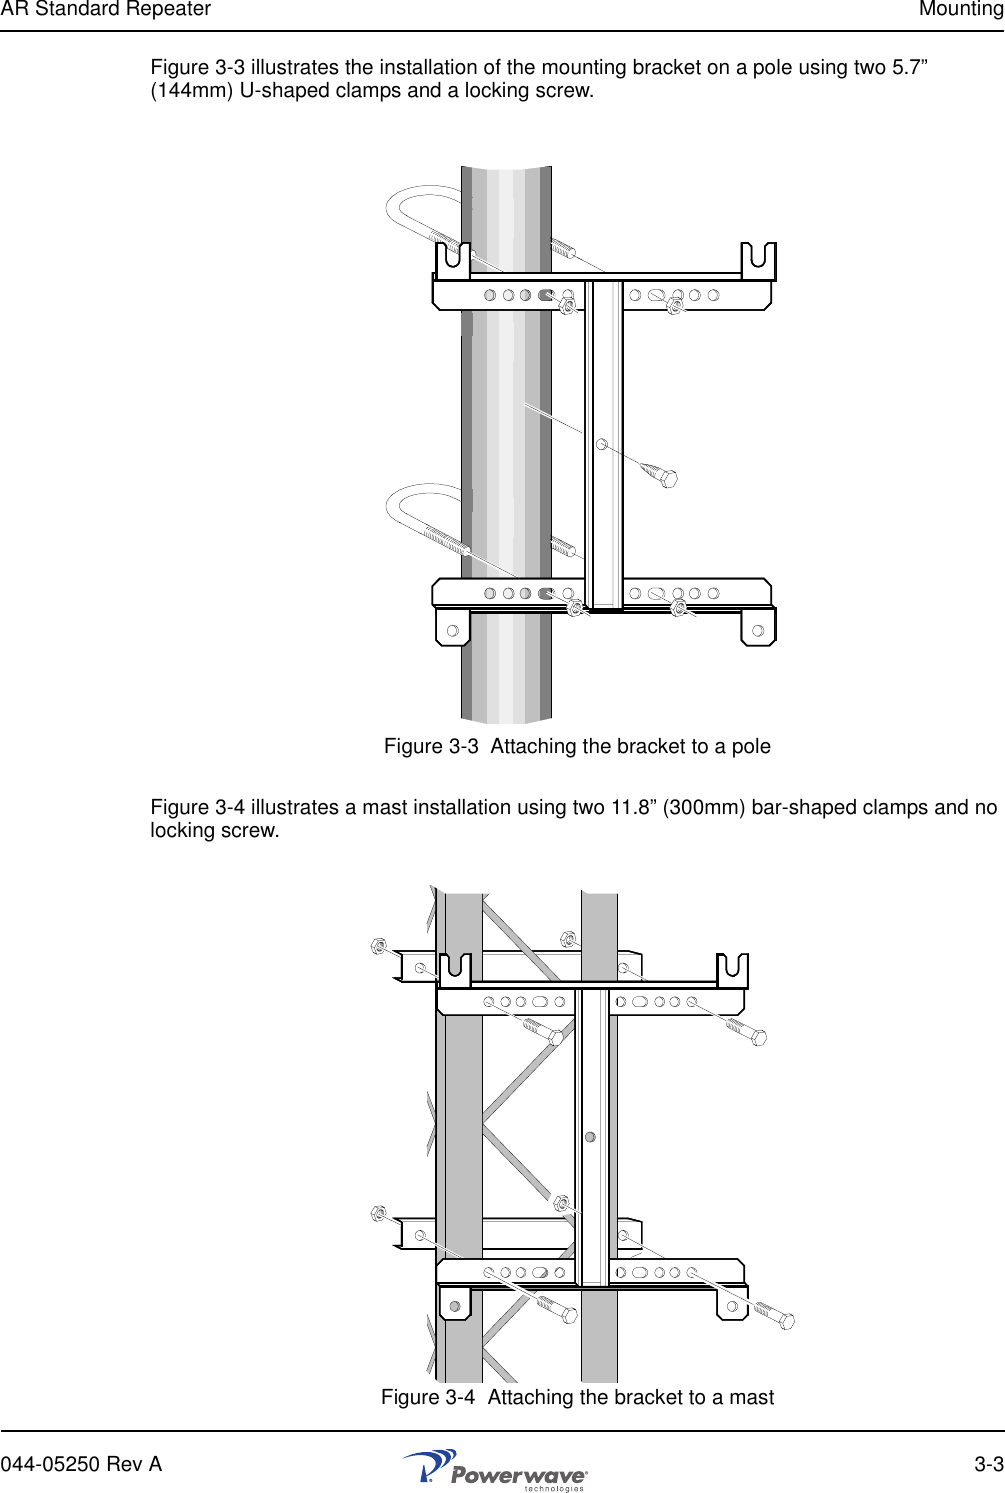 AR Standard Repeater Mounting044-05250 Rev A 3-3Figure 3-3 illustrates the installation of the mounting bracket on a pole using two 5.7” (144mm) U-shaped clamps and a locking screw. Figure 3-3  Attaching the bracket to a poleFigure 3-4 illustrates a mast installation using two 11.8” (300mm) bar-shaped clamps and no locking screw.Figure 3-4  Attaching the bracket to a mast